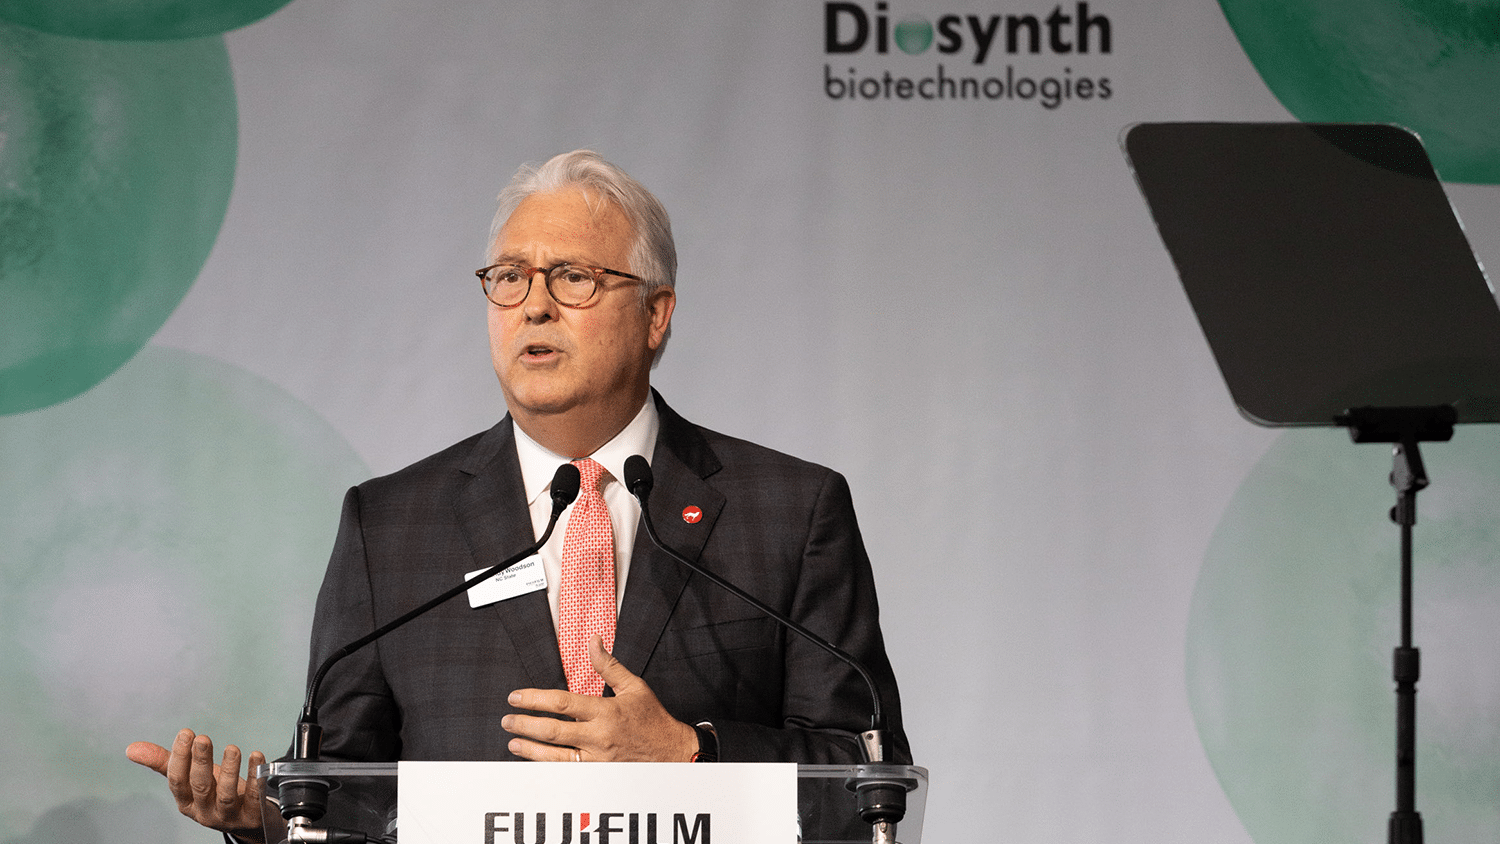 Chancellor Randy Woodson speaks at an event for FUJIFILM Diosynth.